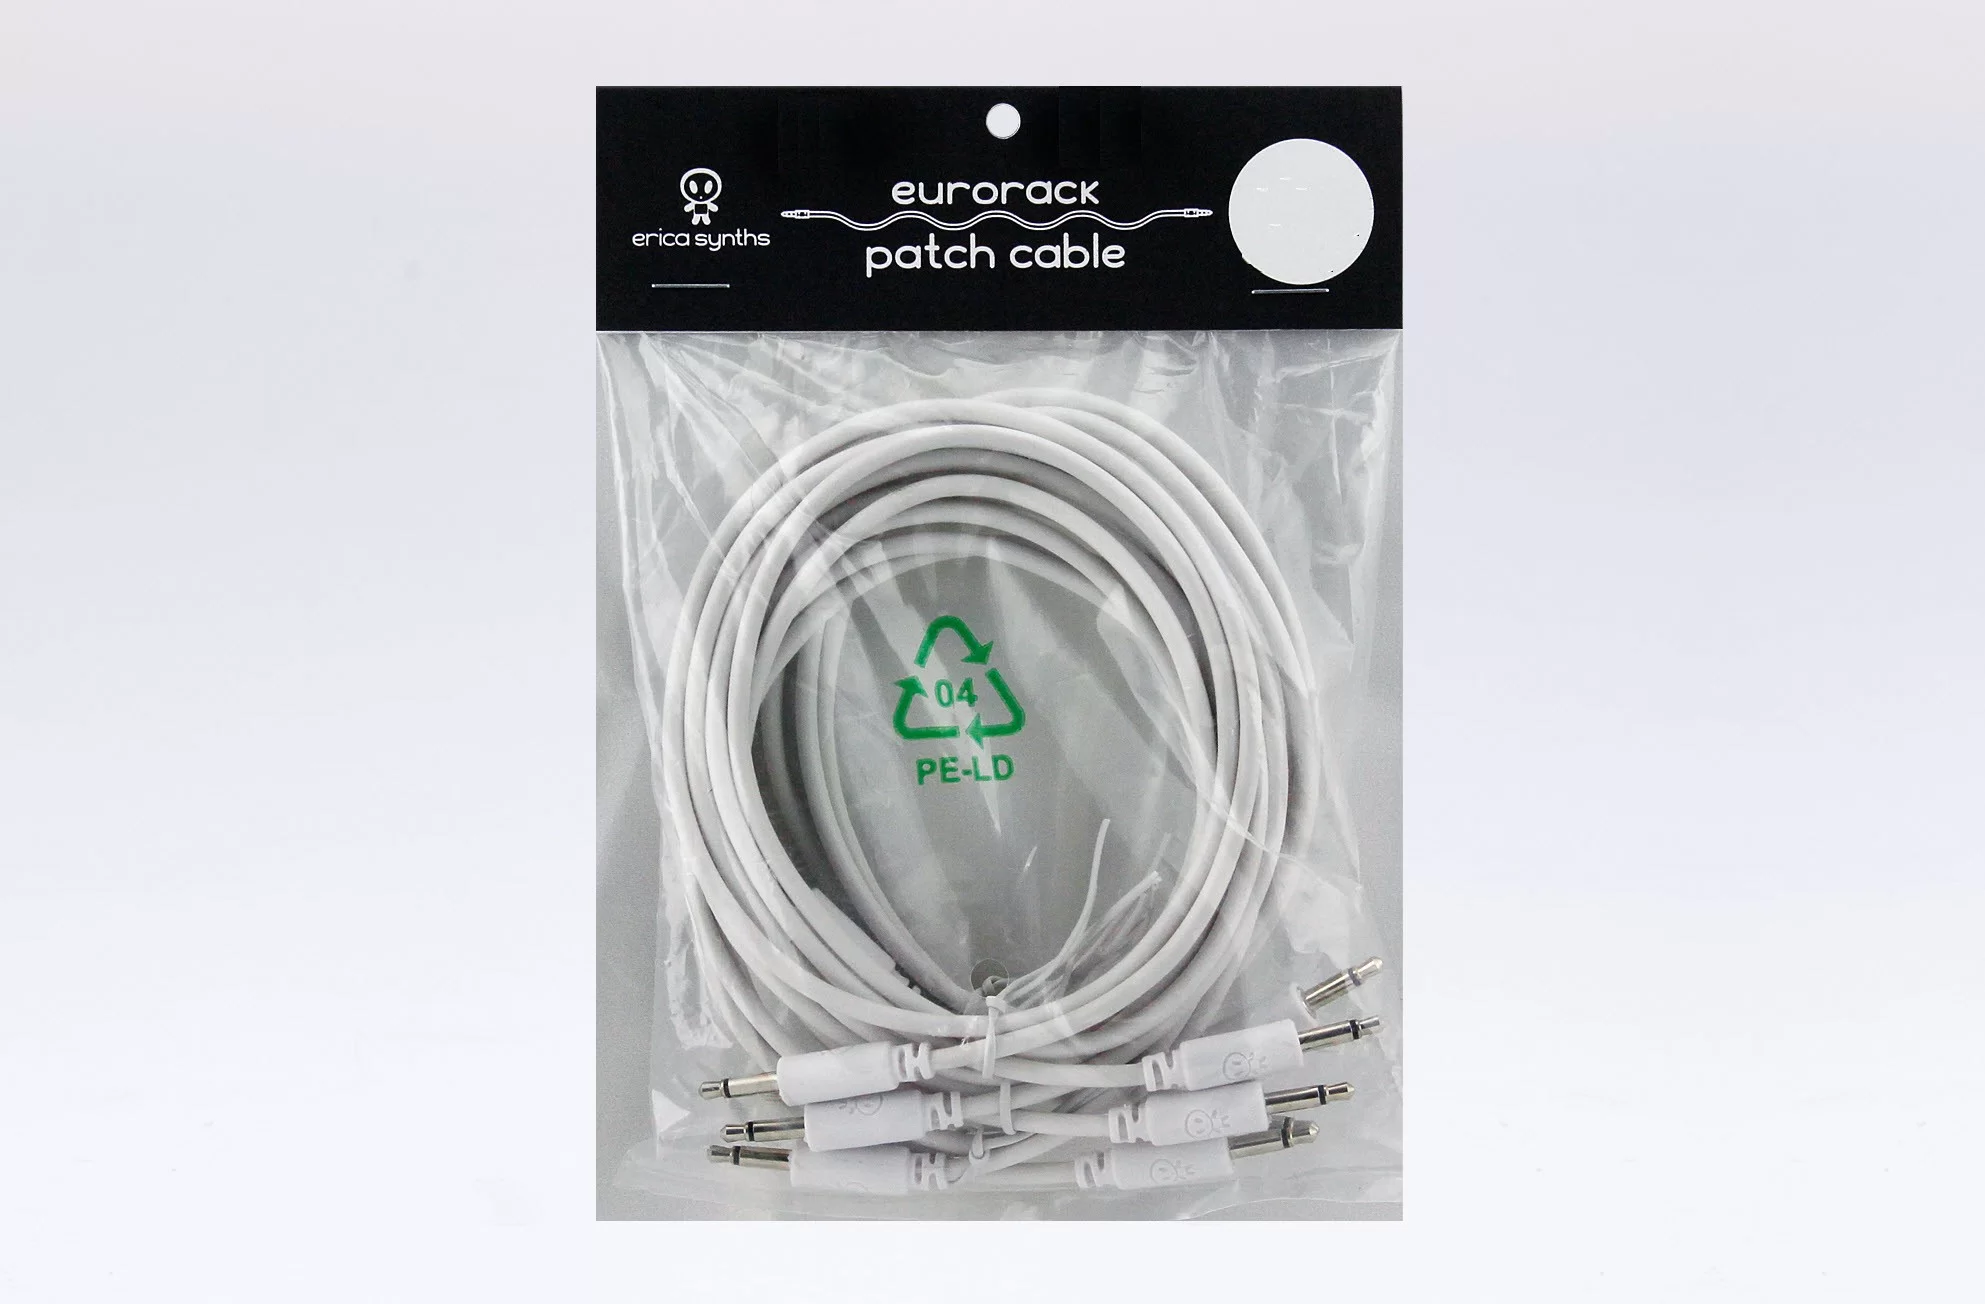 Erica Synths Eurorack patch cables 10cm (5 pcs) - Red